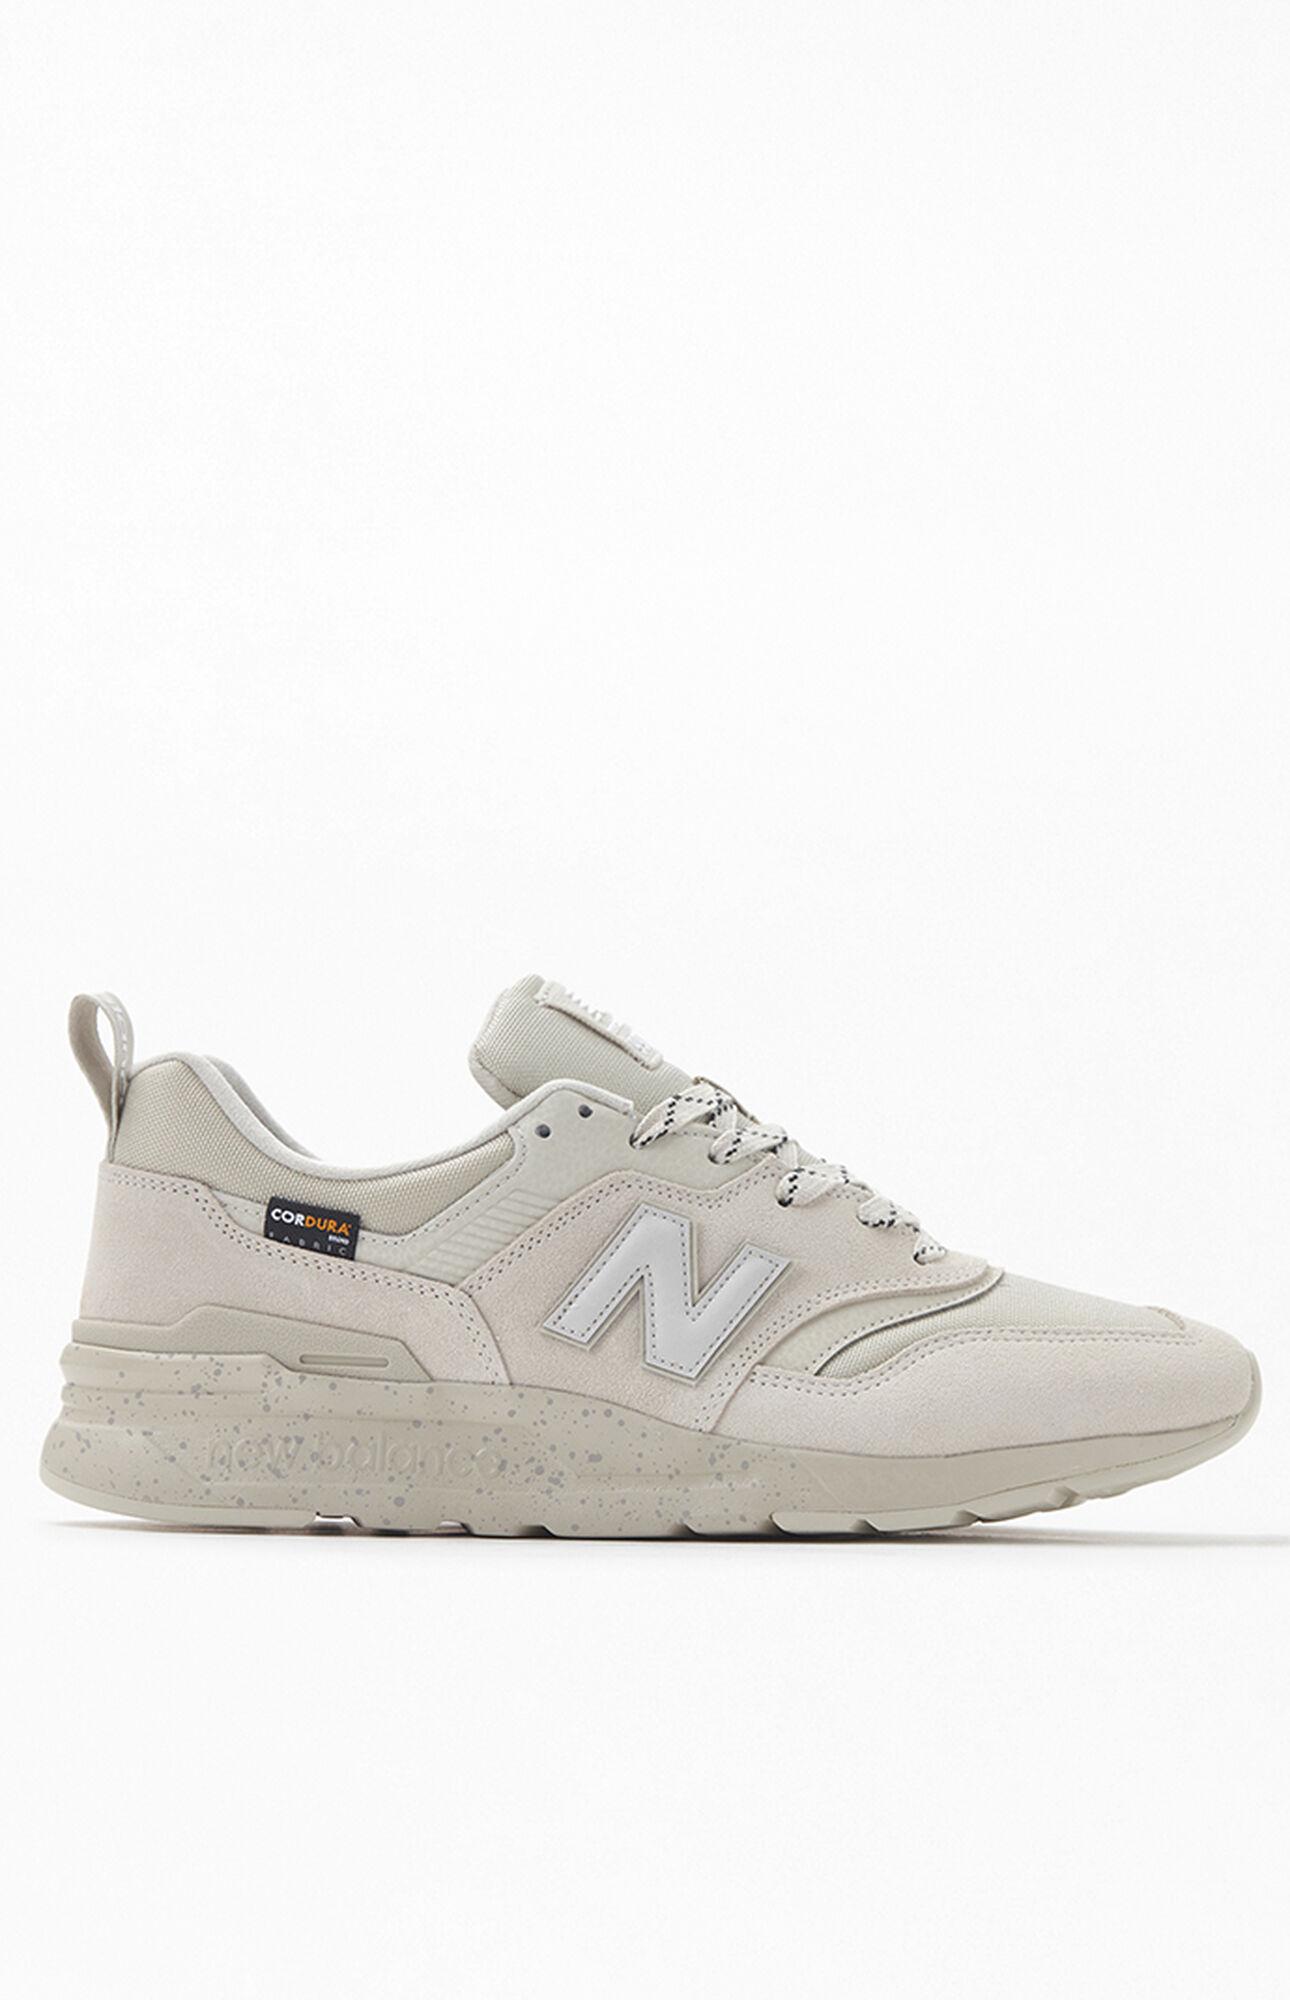 New Balance Lace 997h Off White Shoes for Men | Lyst